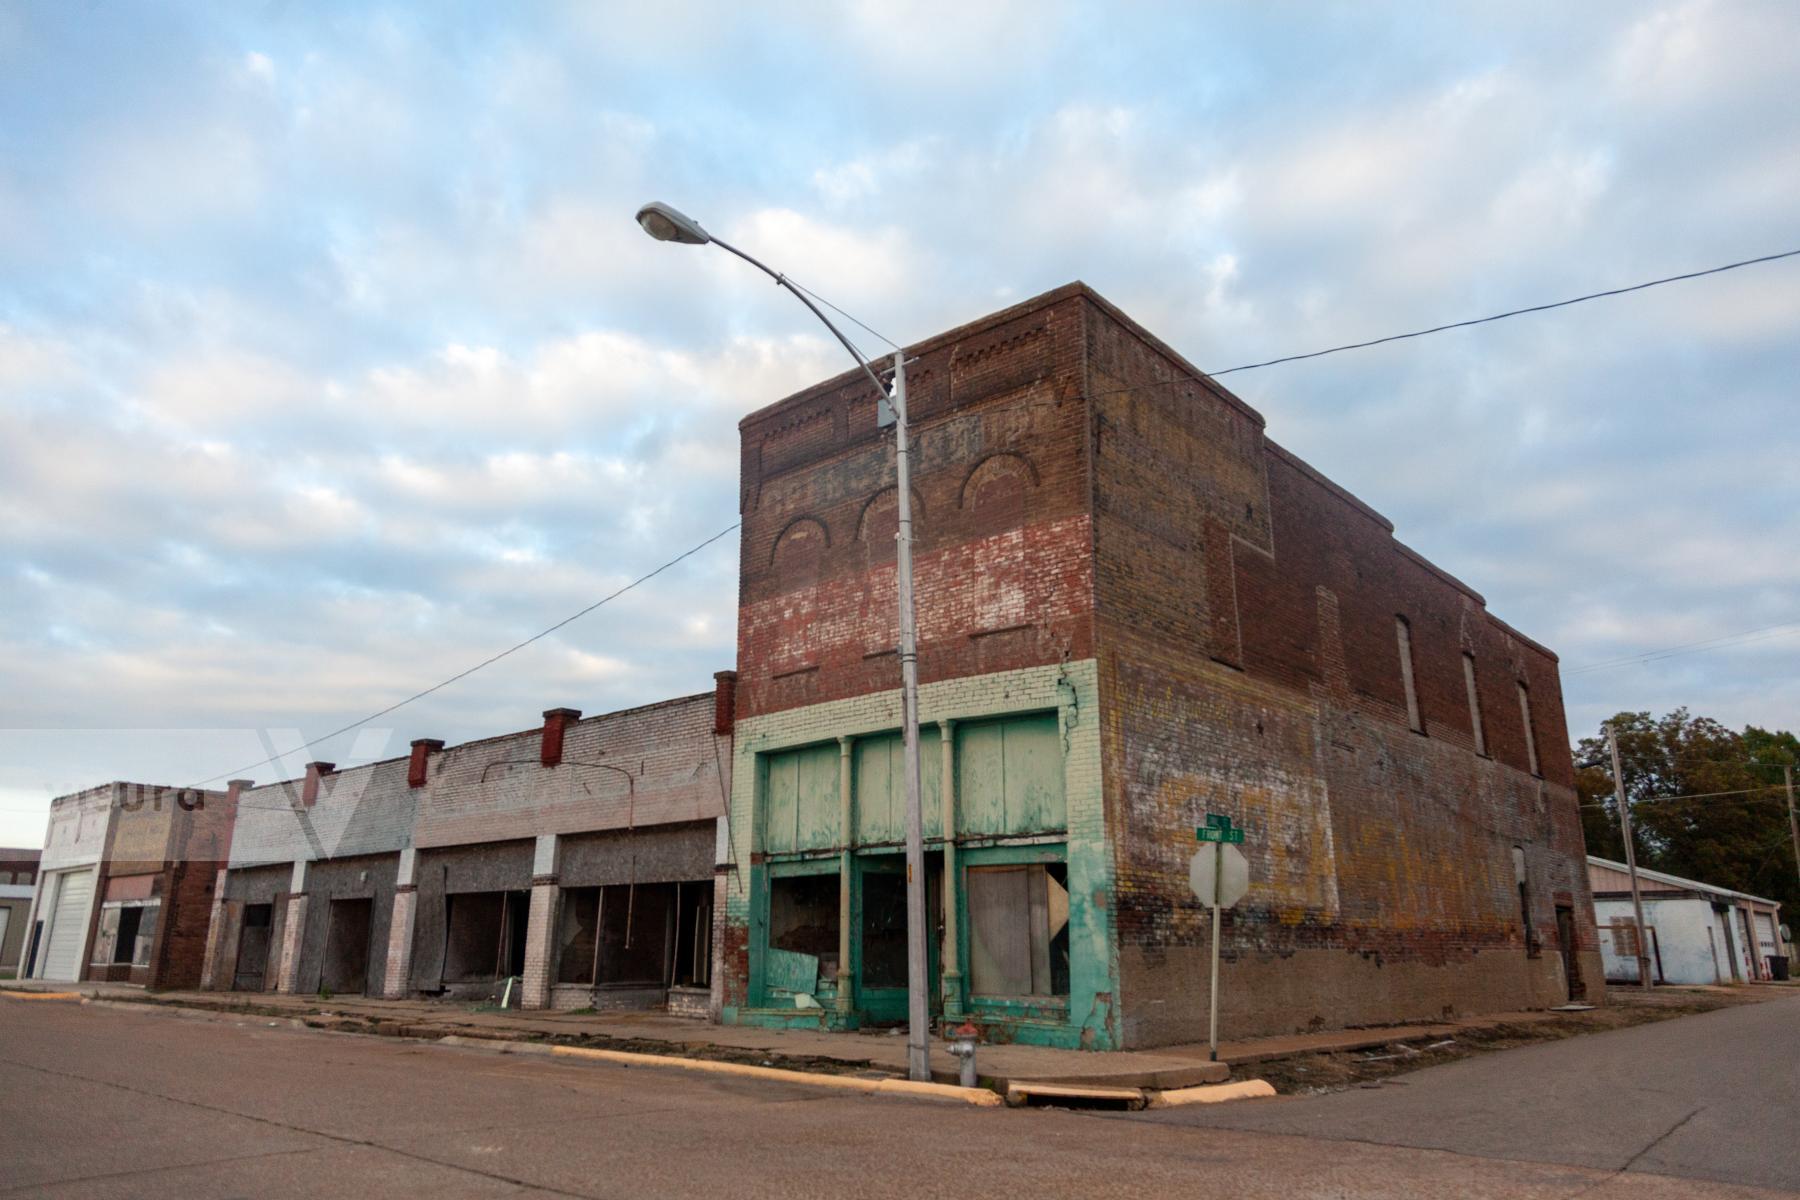 Purchase Decaying Small Towns in the American South by Katie Linsky Shaw